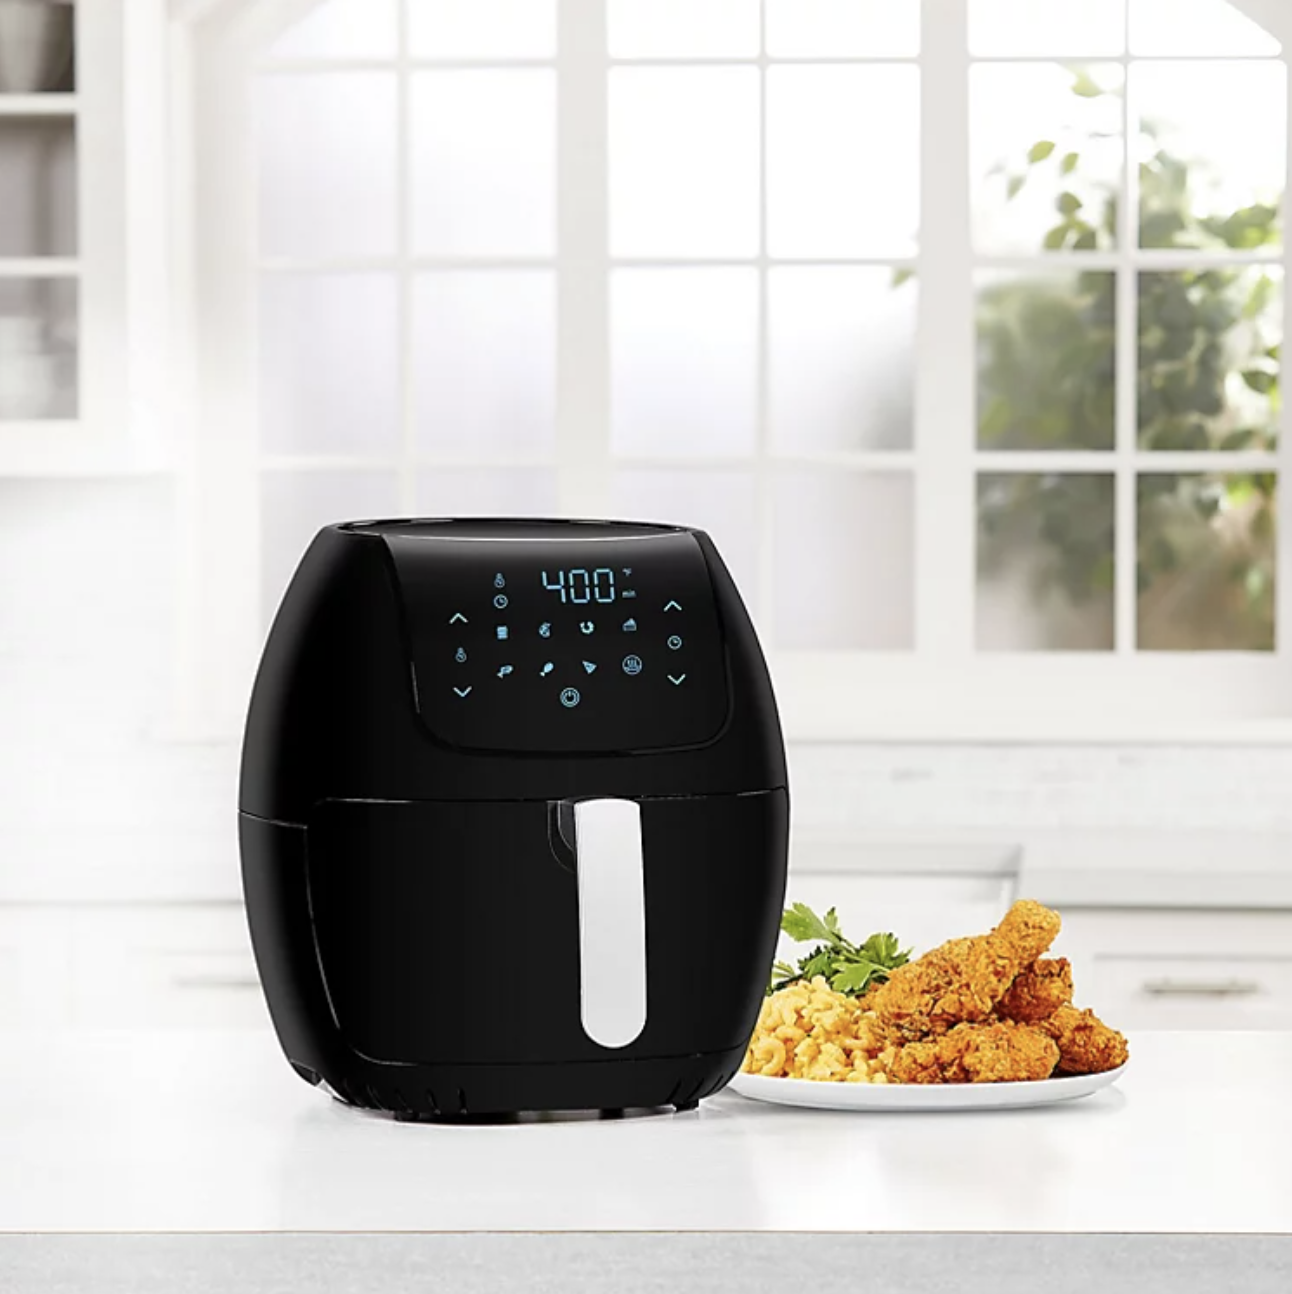 the black air fryer with food next to it